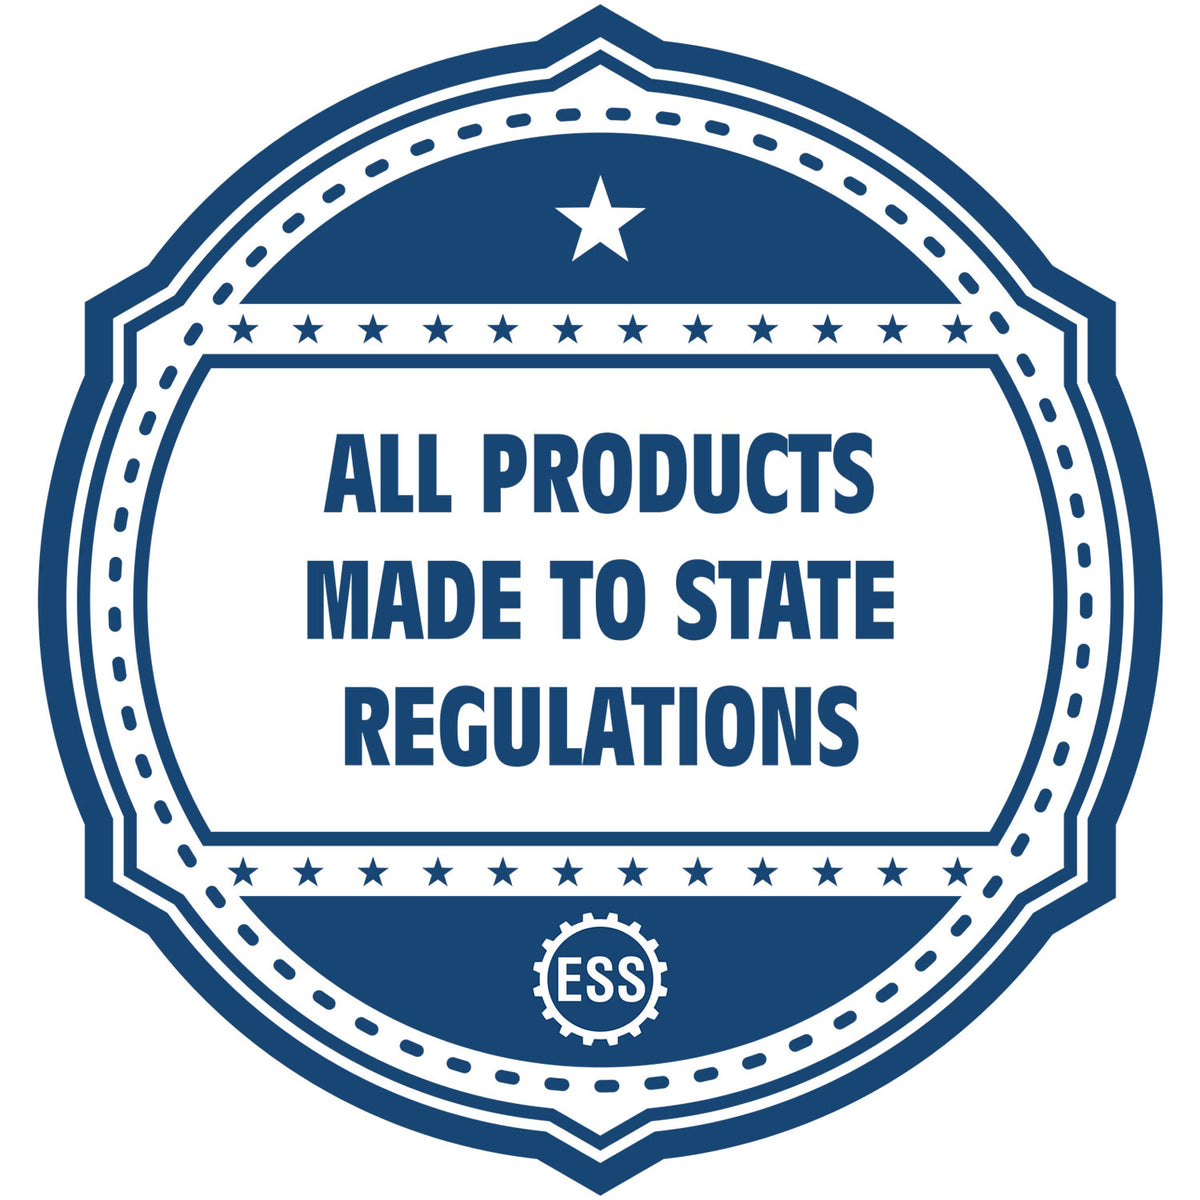 An icon or badge element for the Massachusetts Landscape Architectural Seal Stamp showing that this product is made in compliance with state regulations.